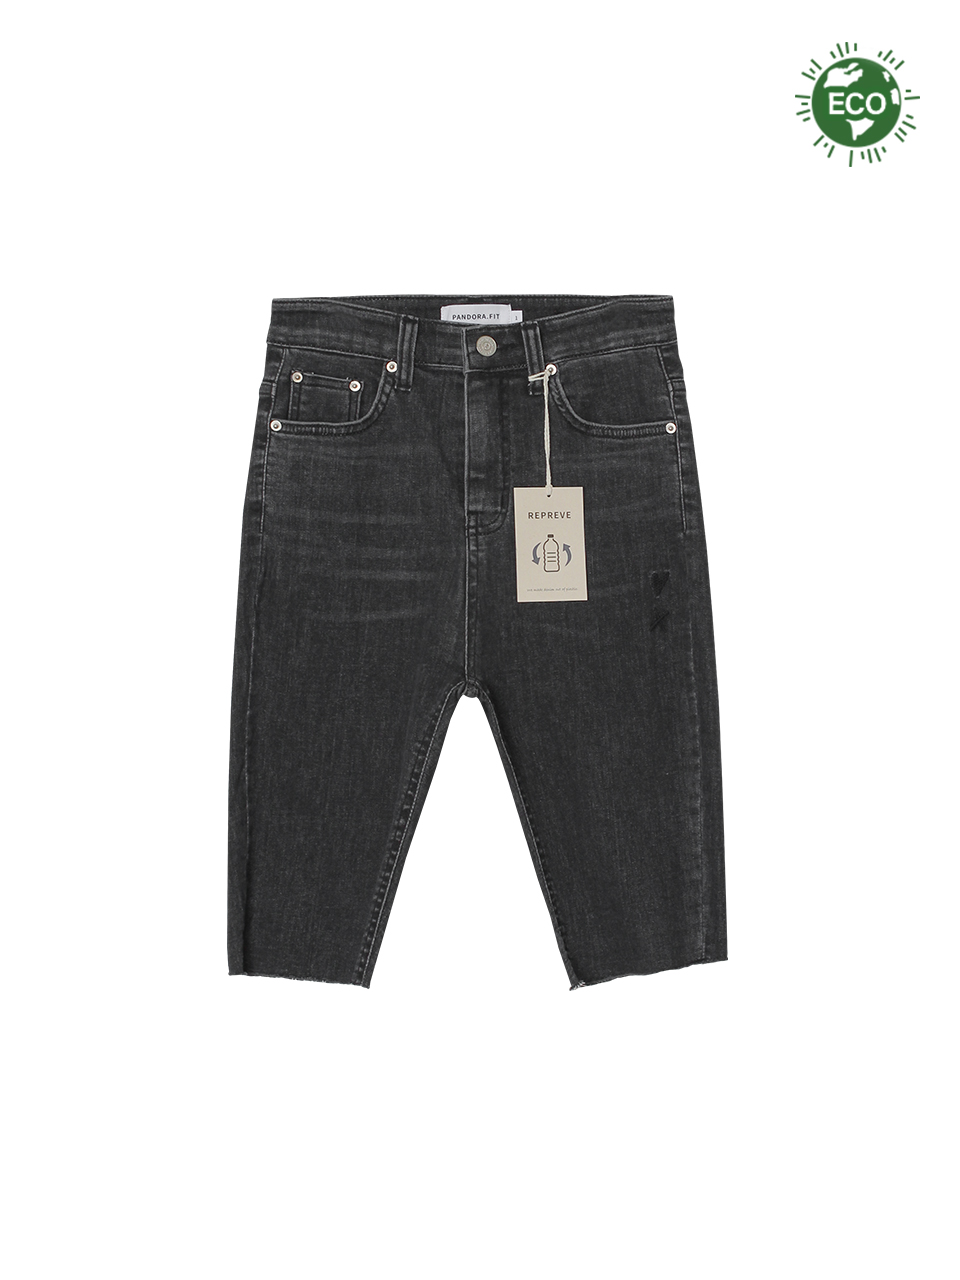 [SHORTS] Carre Jeans